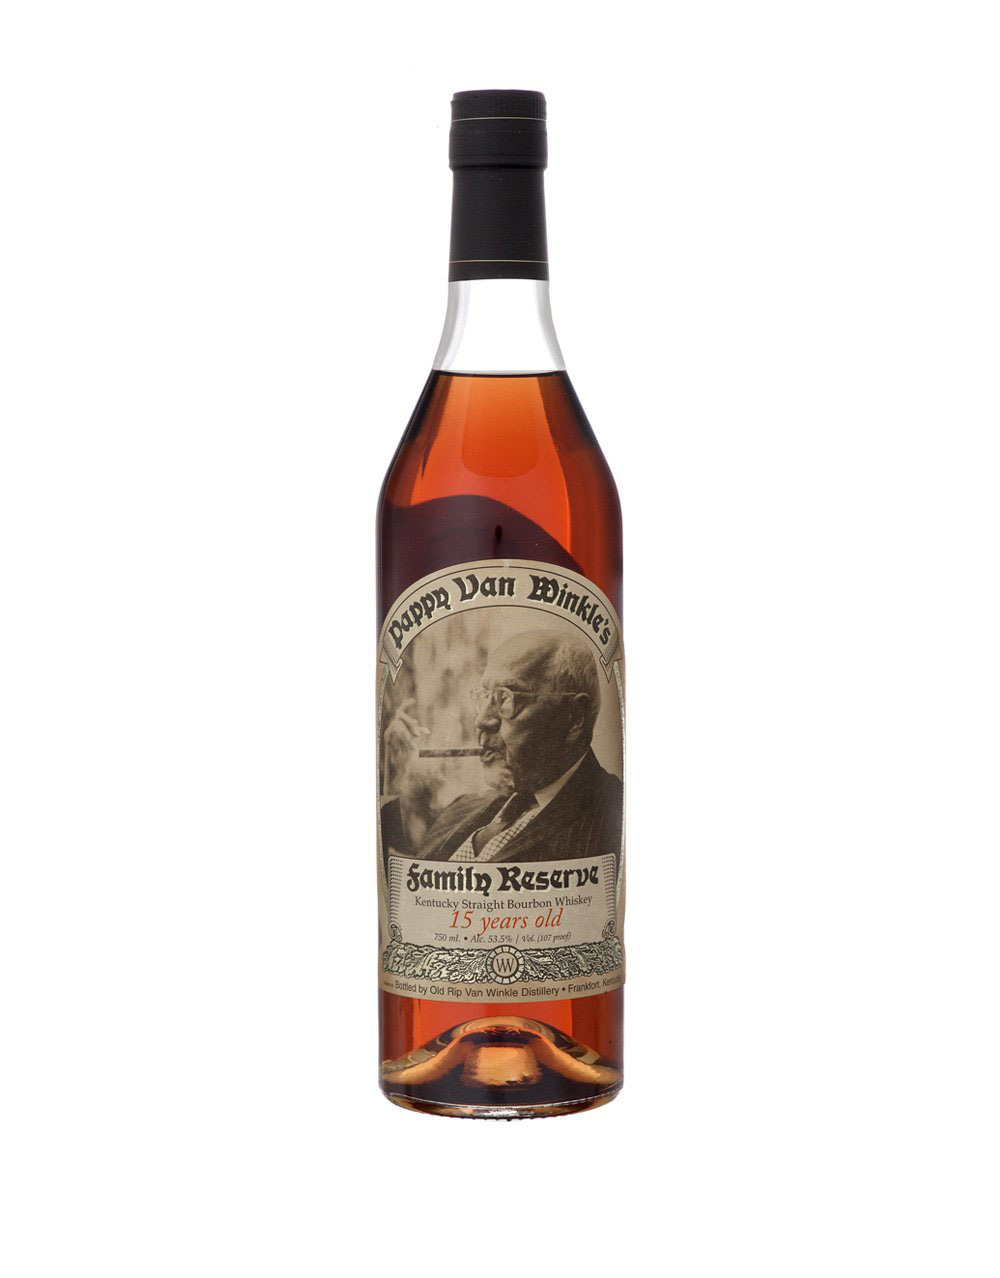 Pappy Van Winkle's Family Reserve 15 Year Old Bourbon Whiskey